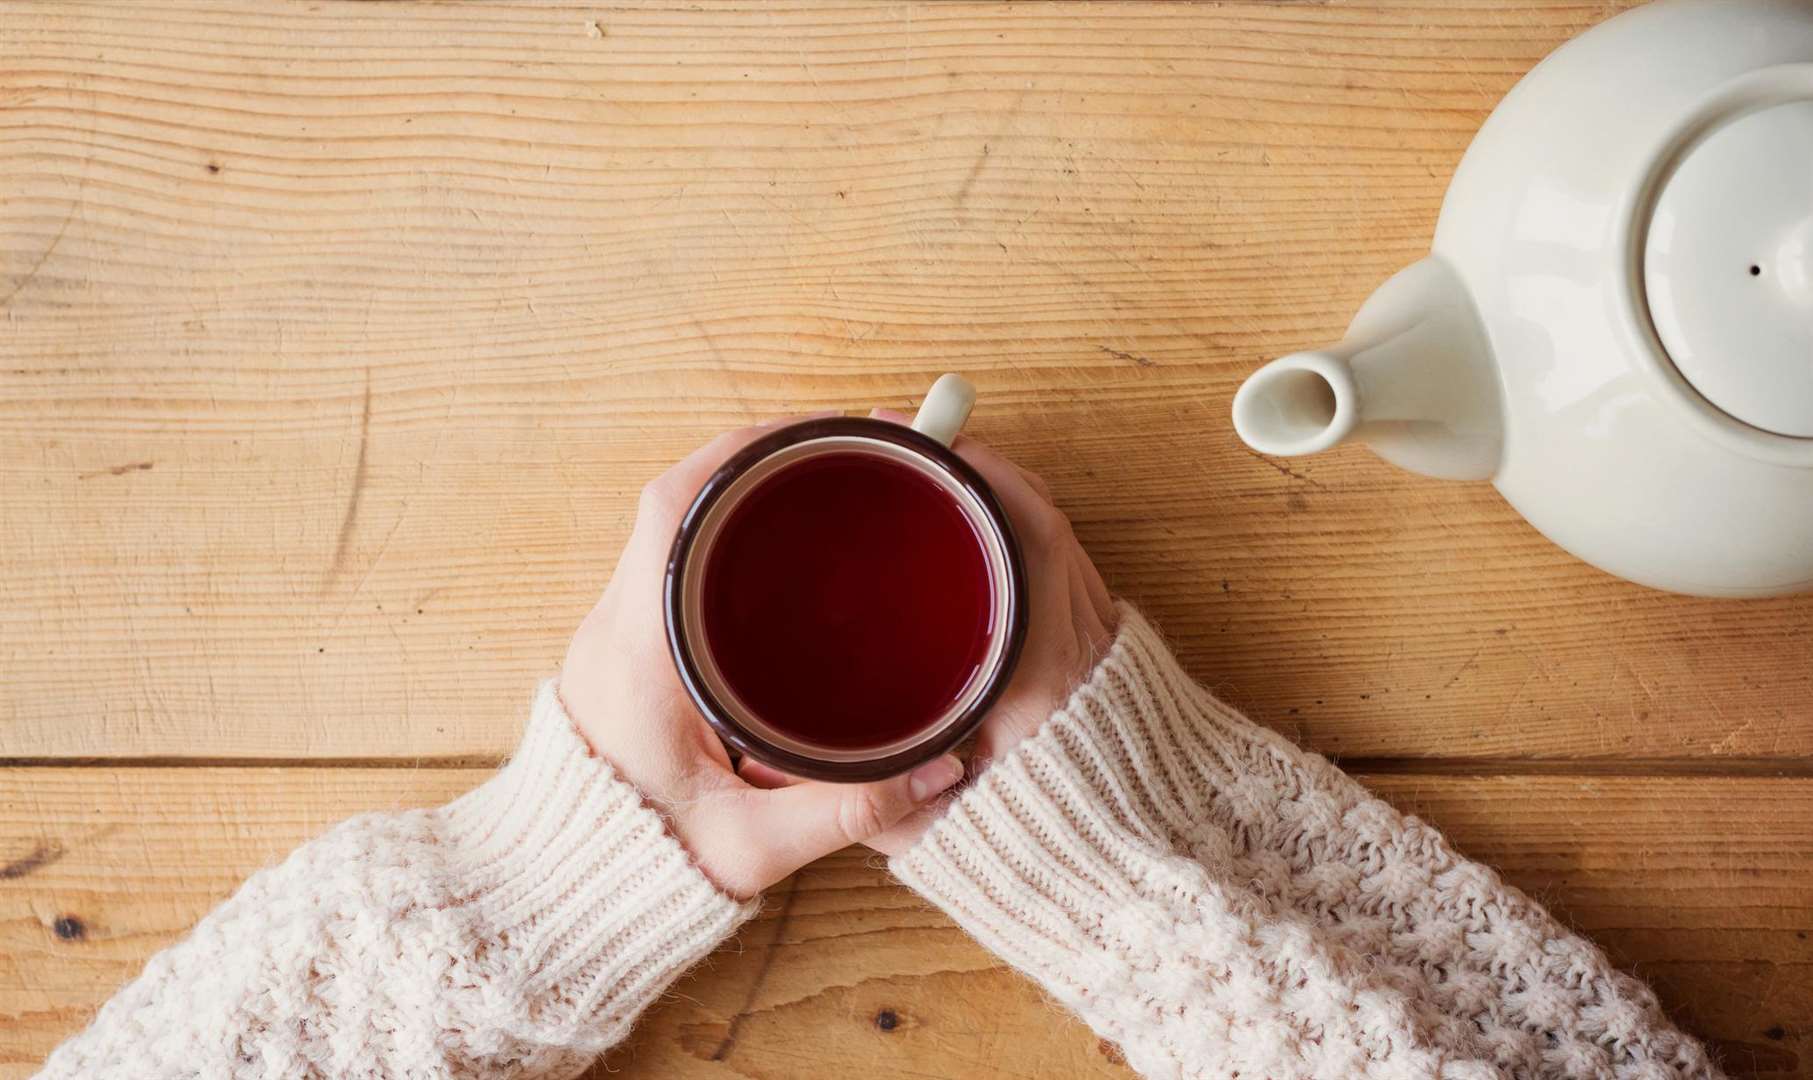 Relax with a cup of tea